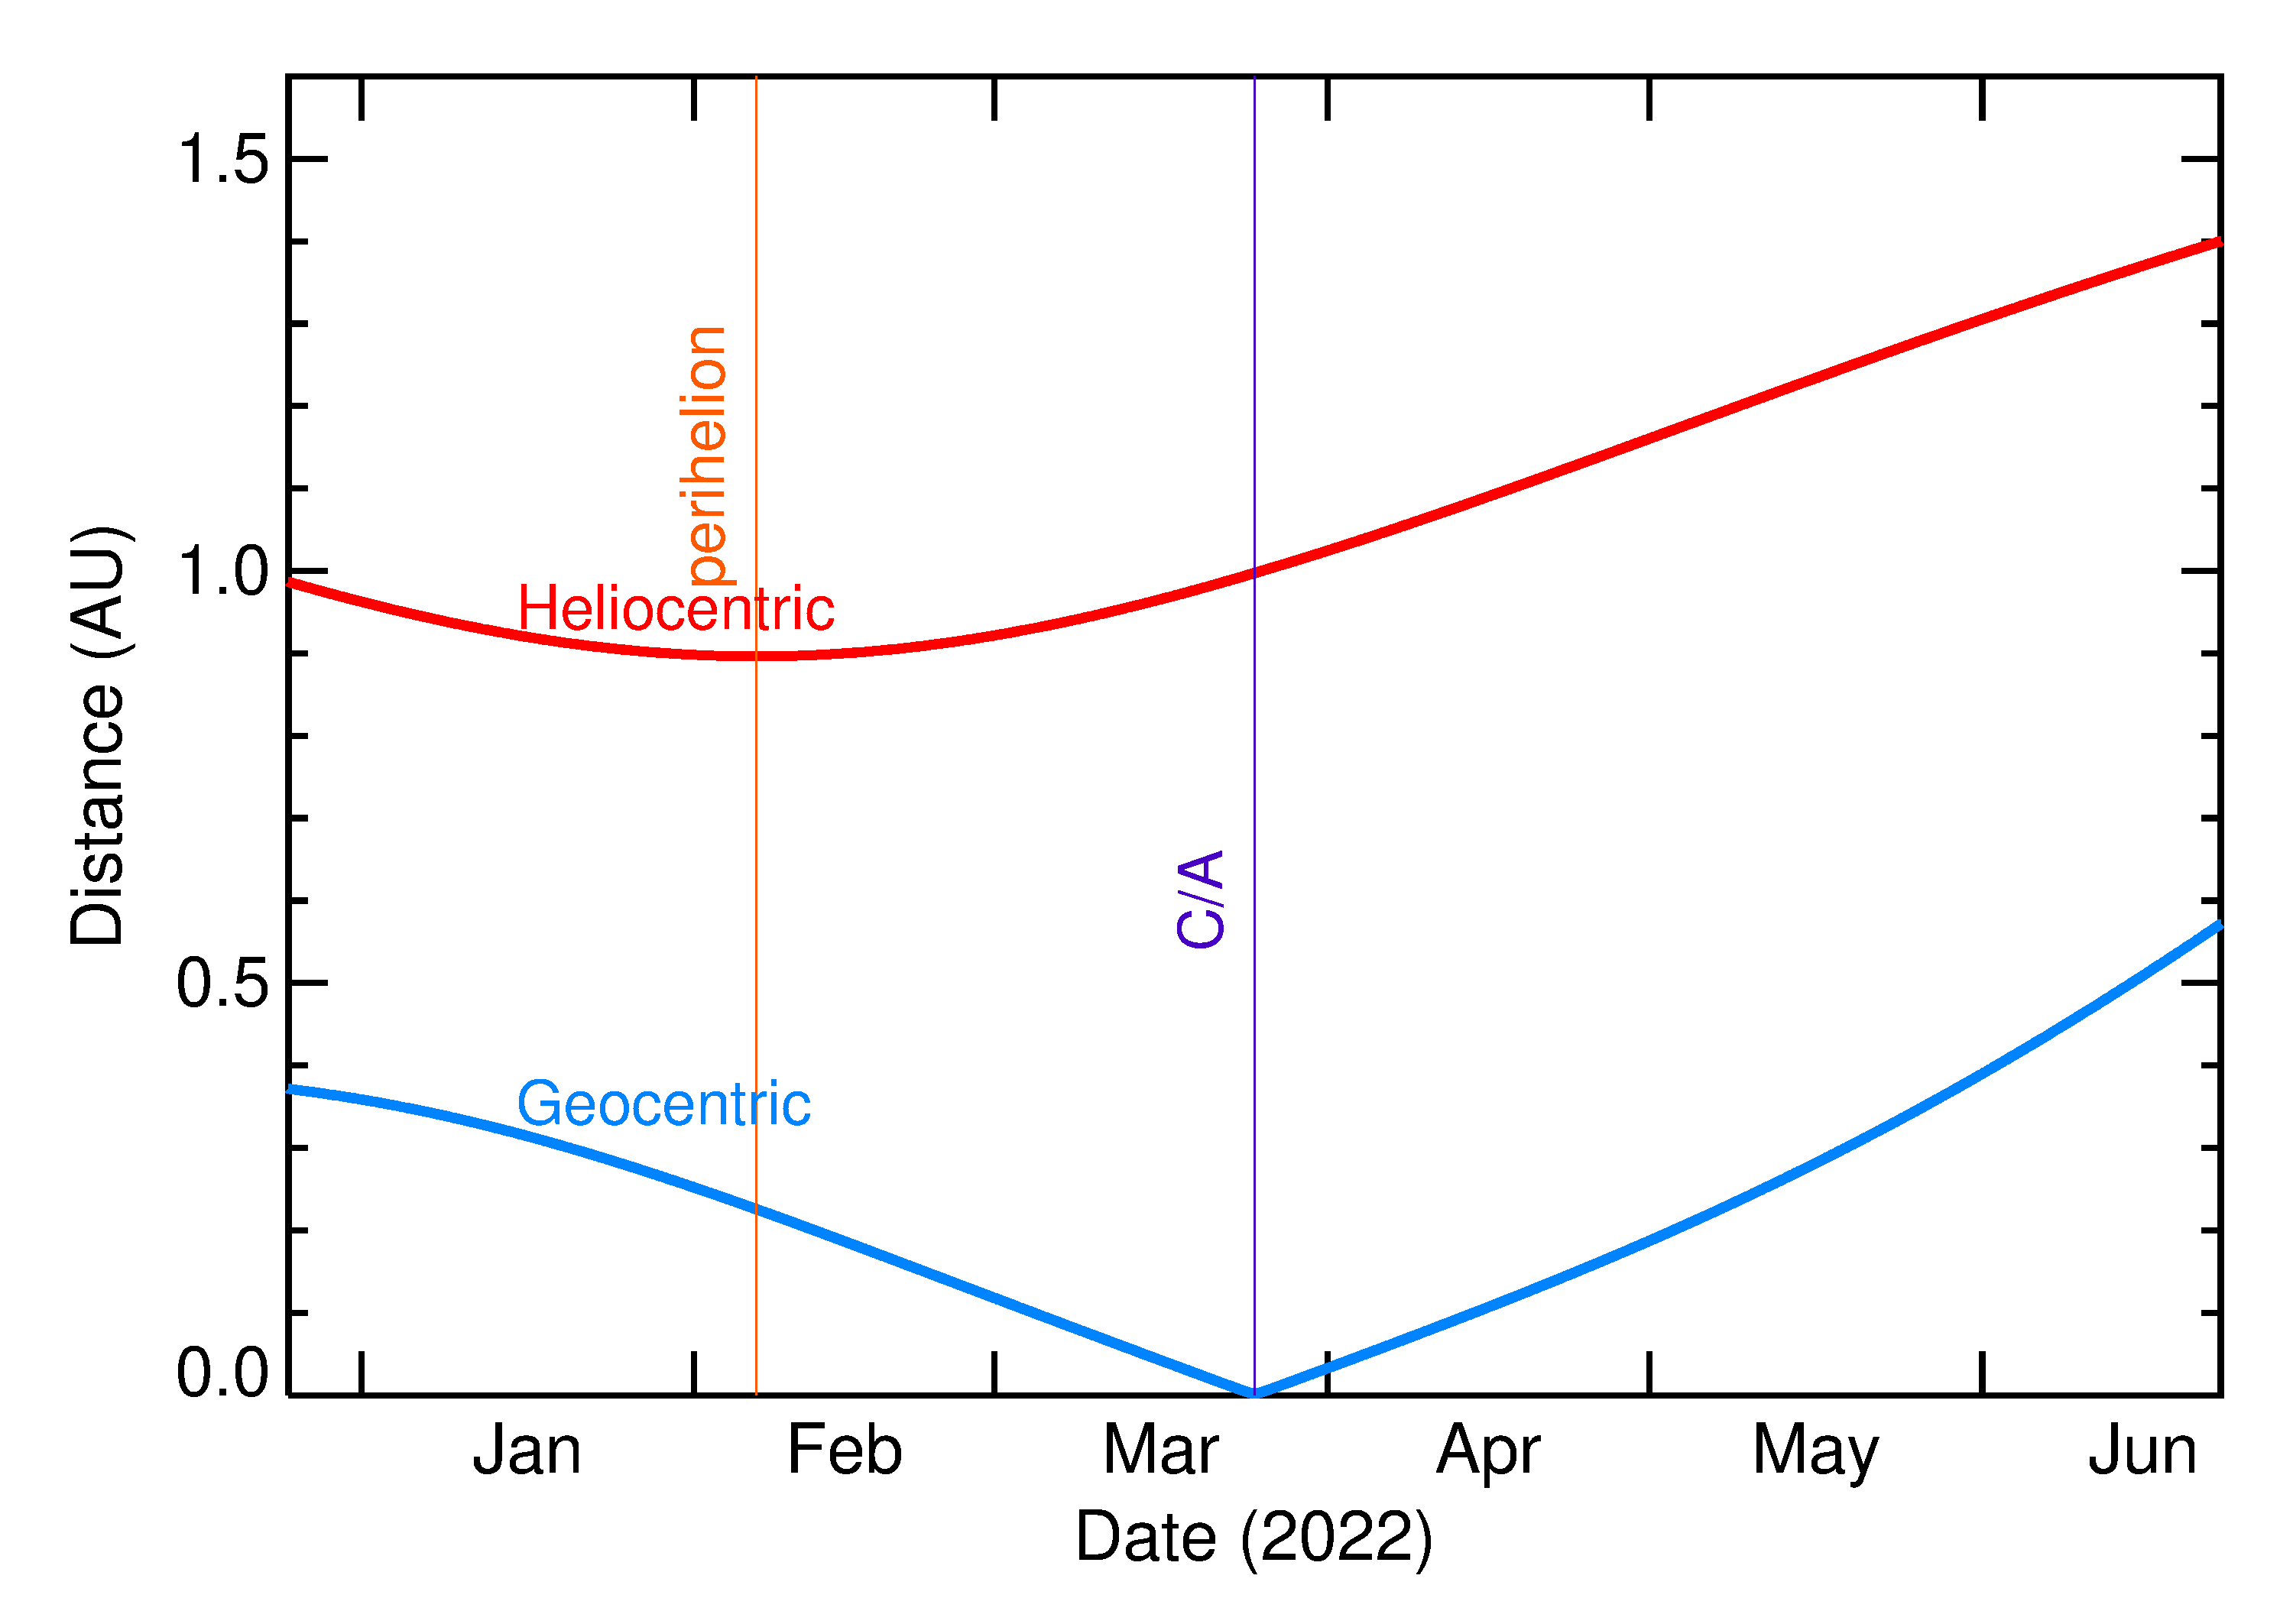 Heliocentric and Geocentric Distances of 2022 FZ3 in the months around closest approach